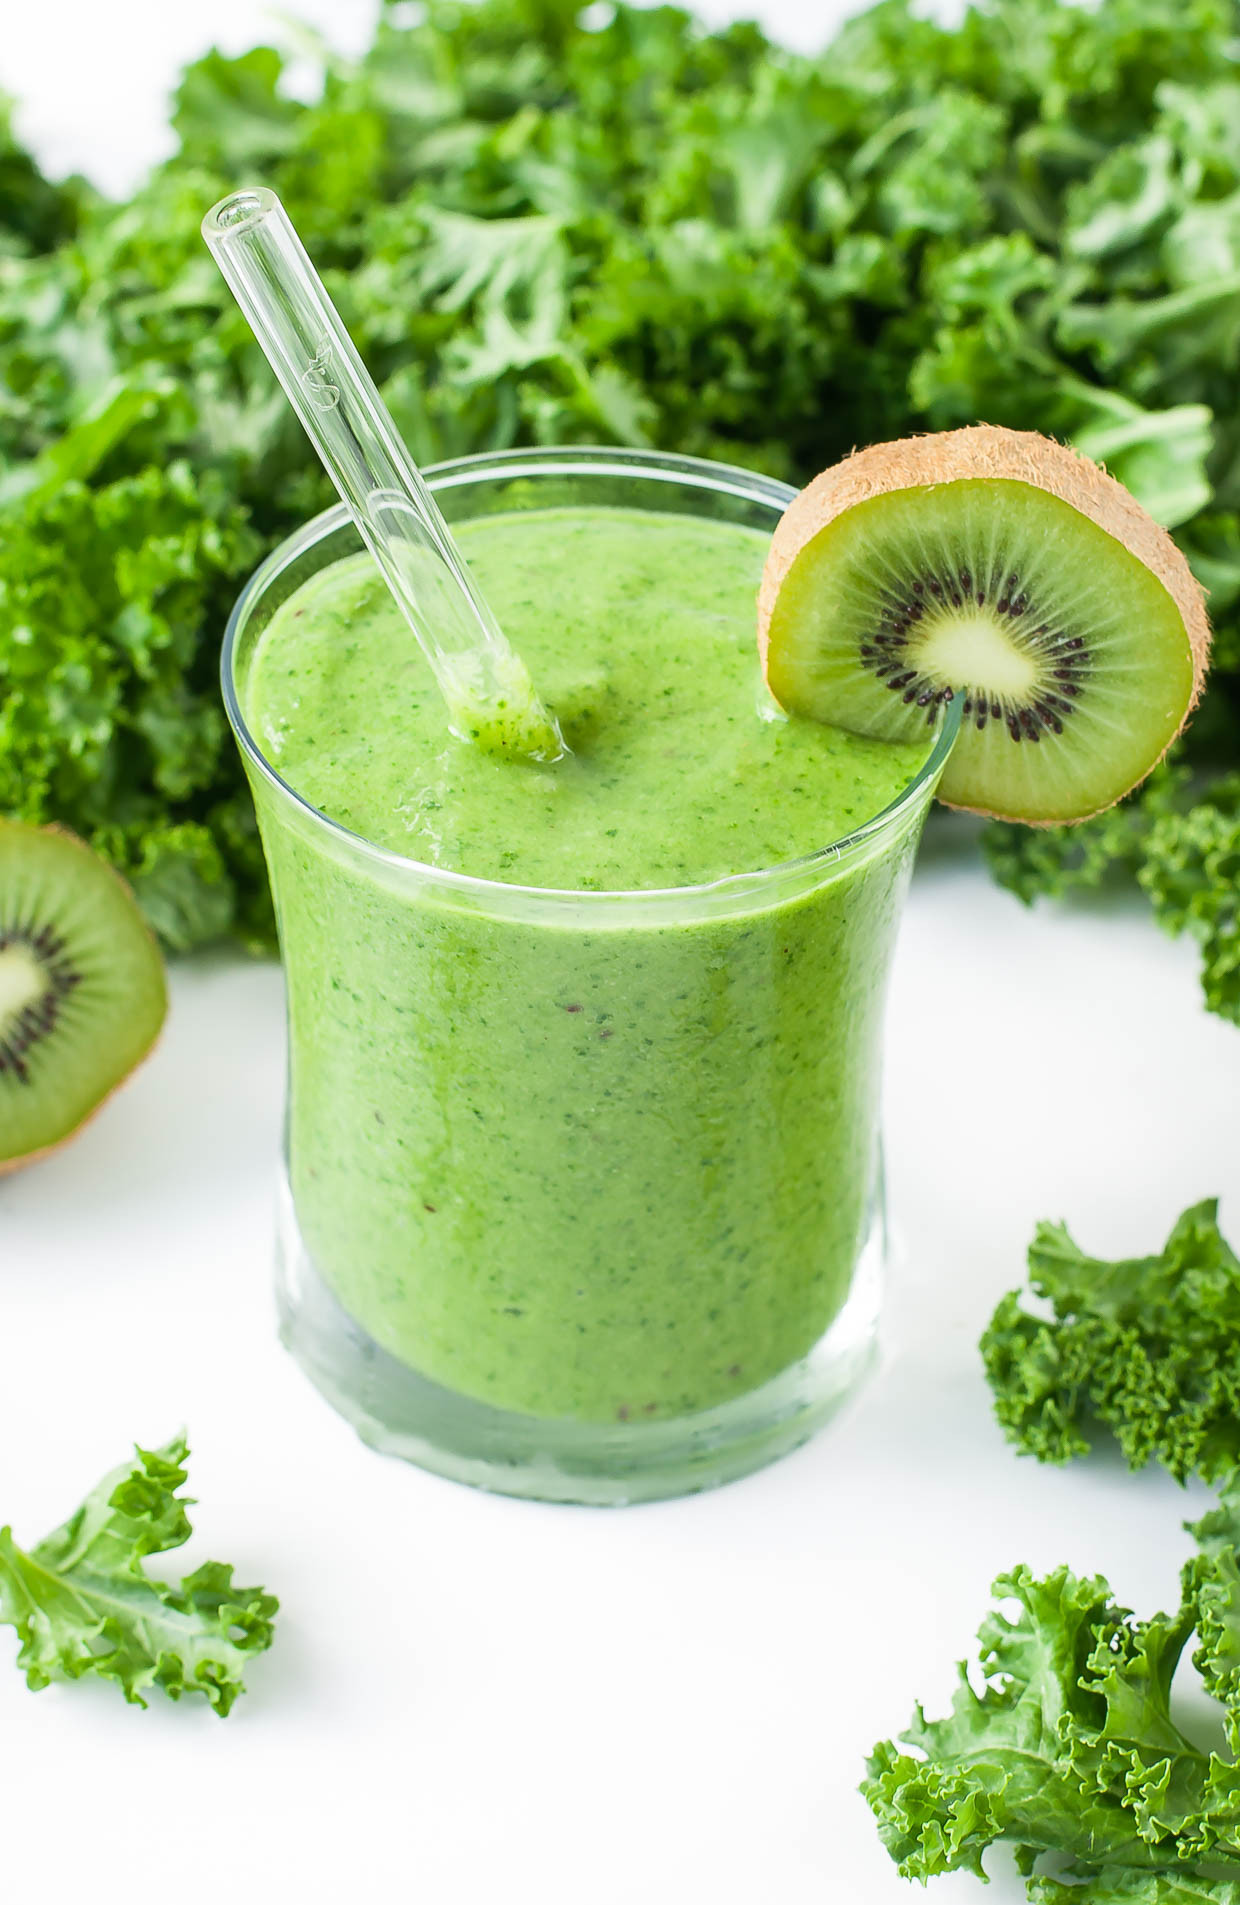 Kale Smoothie Recipes Healthy
 15 Healthy but Tasty Smoothie Recipes Big Bear s Wife